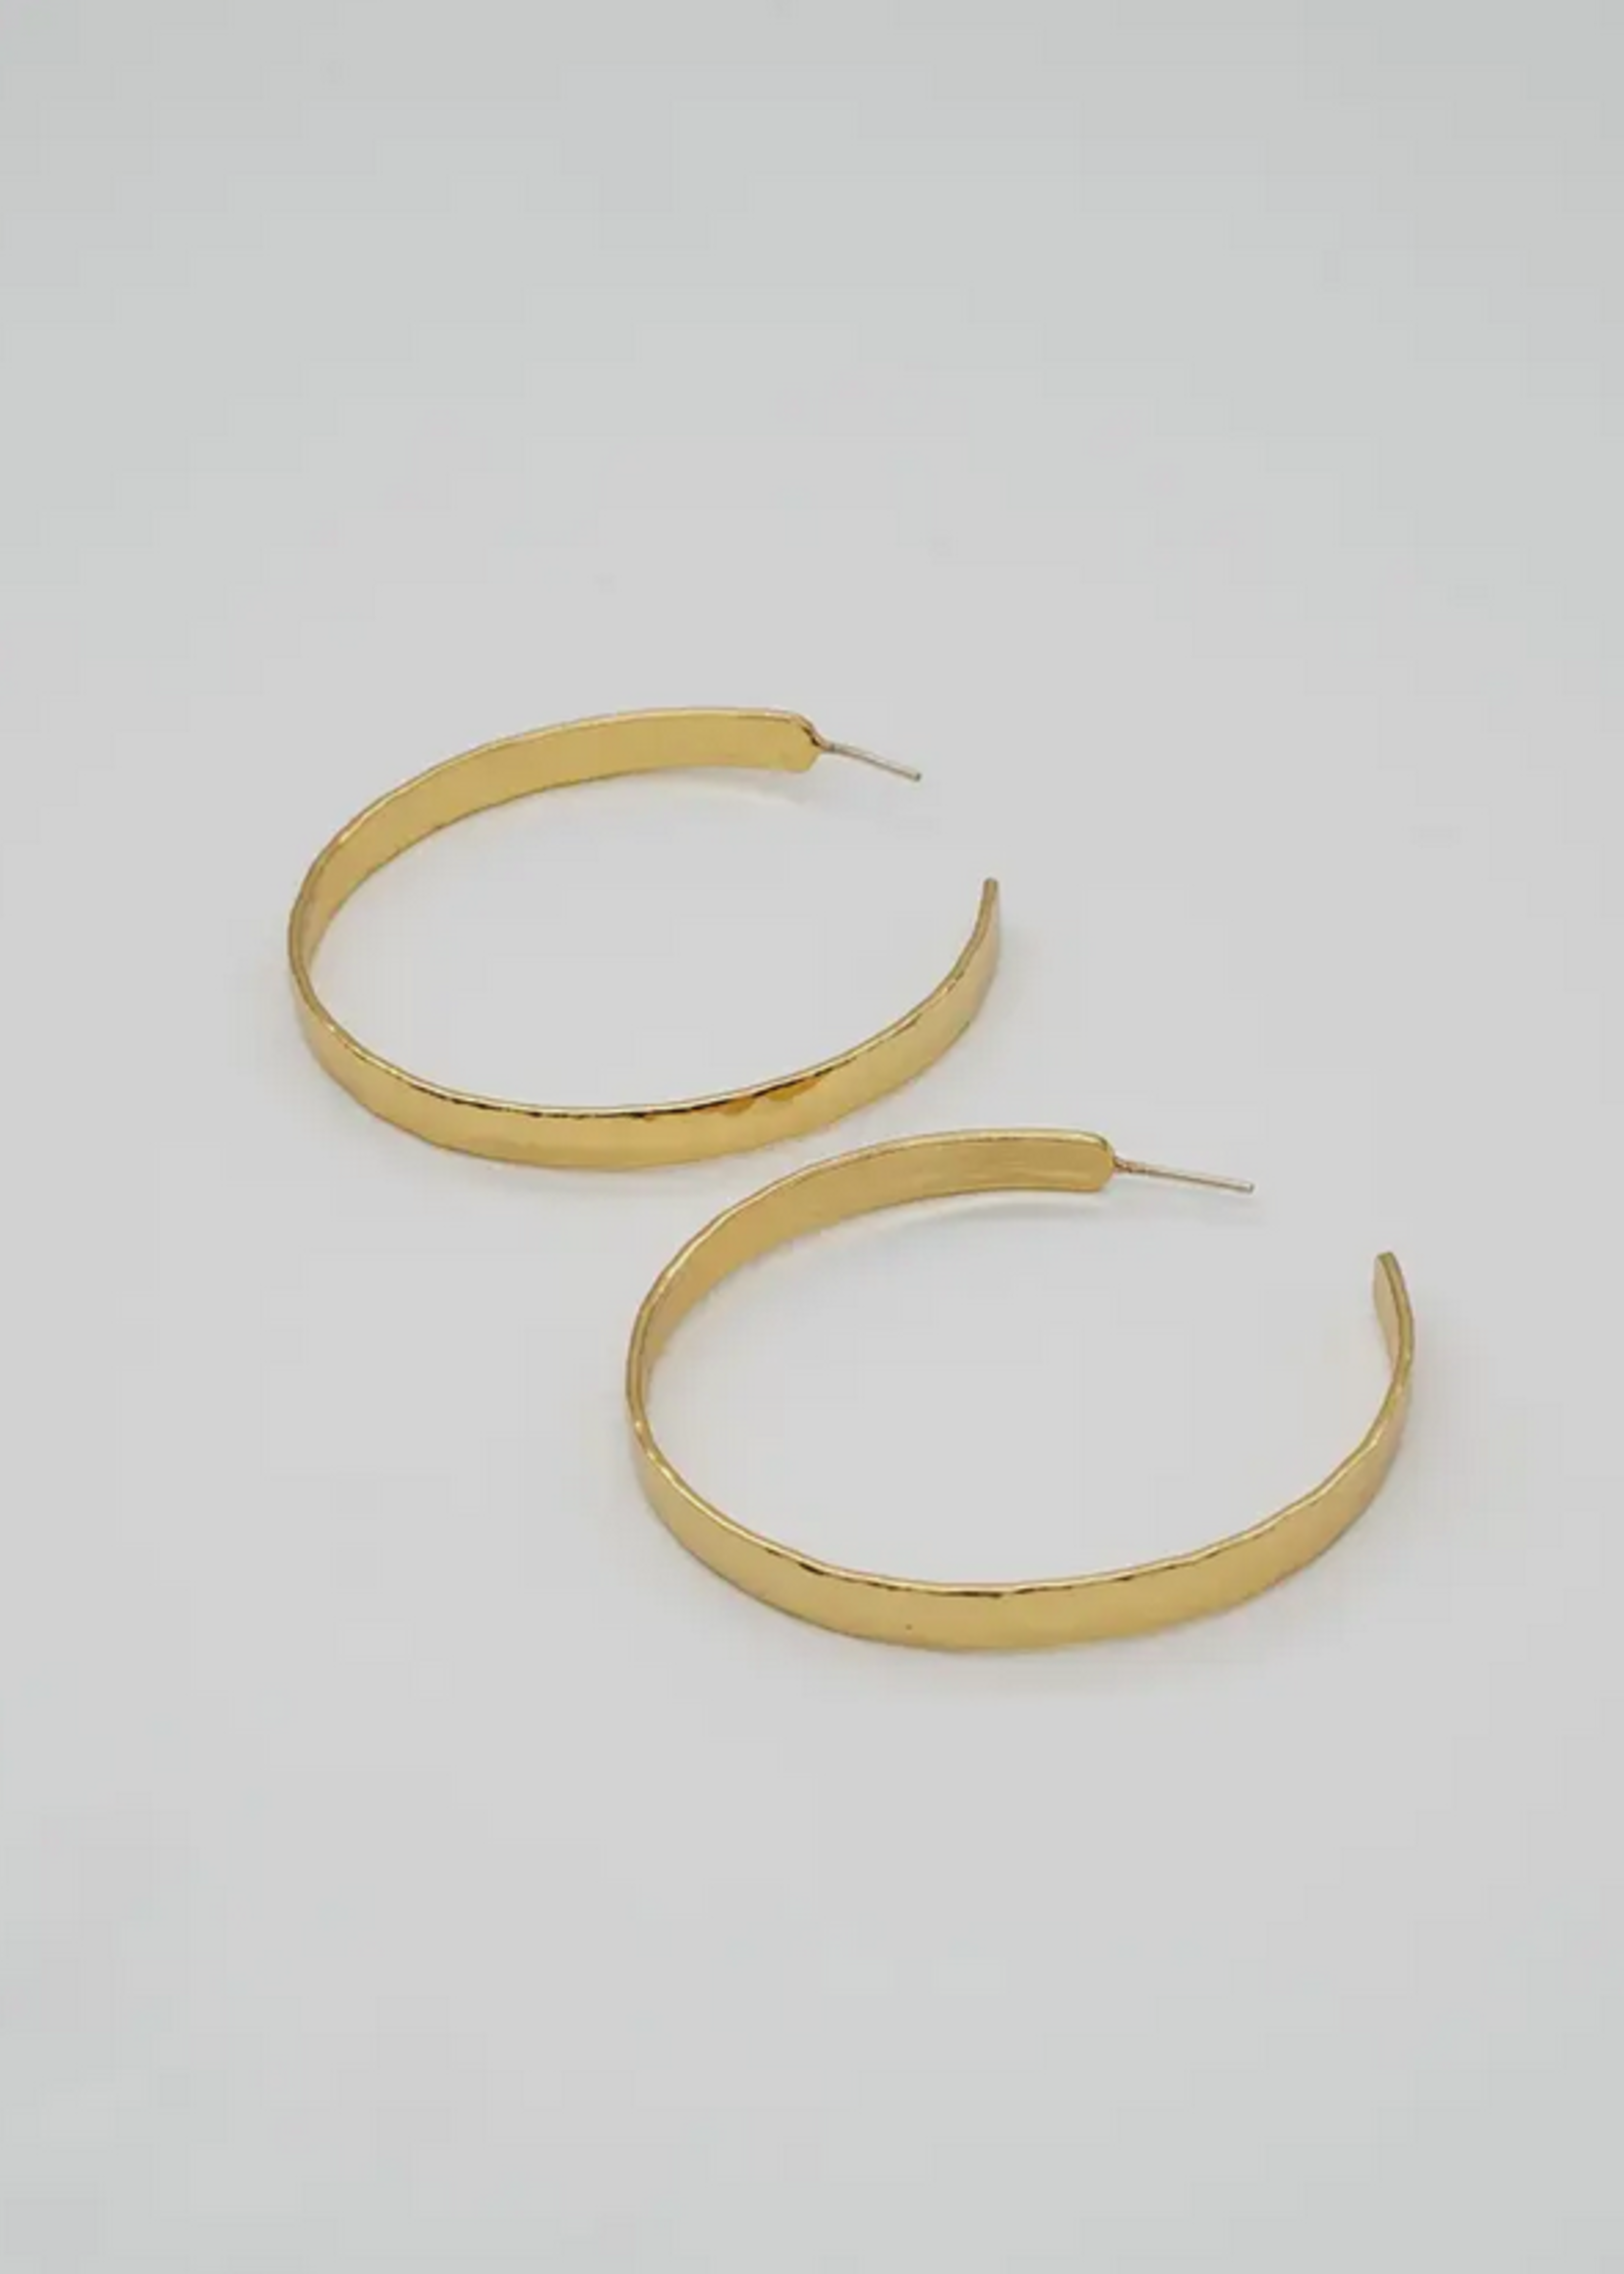 BRENDA GRANDS JEWELRY PERFECT LOVE HAMMERED HOOPS